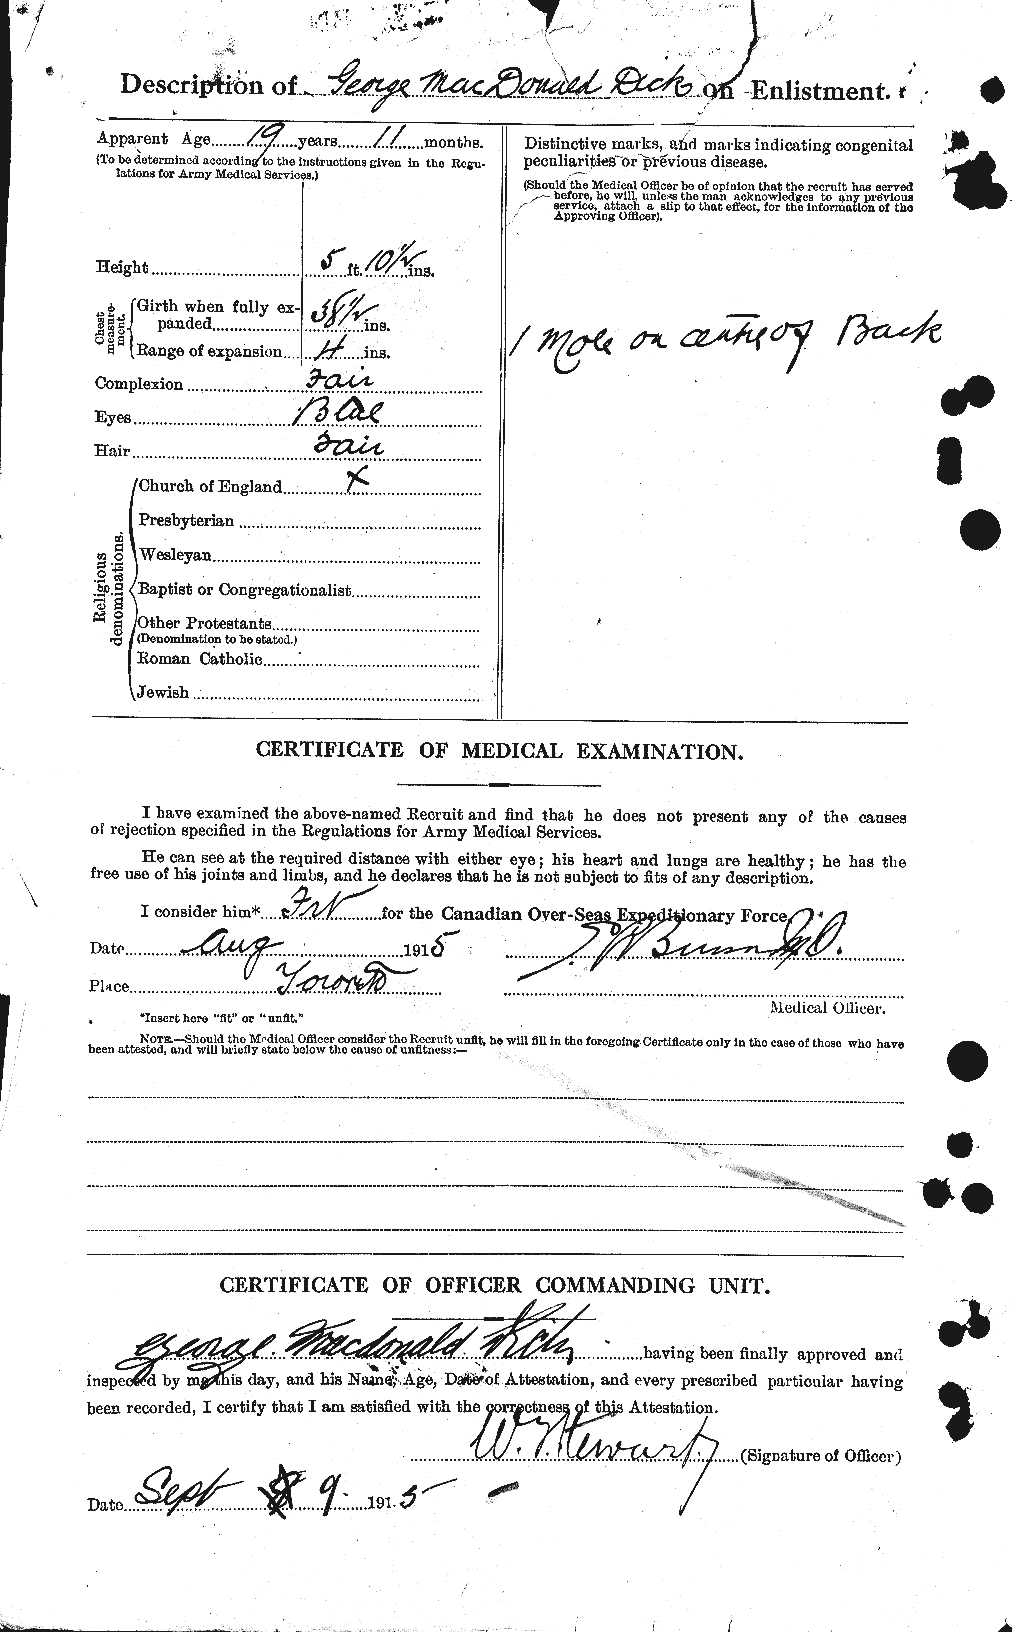 Personnel Records of the First World War - CEF 290477b